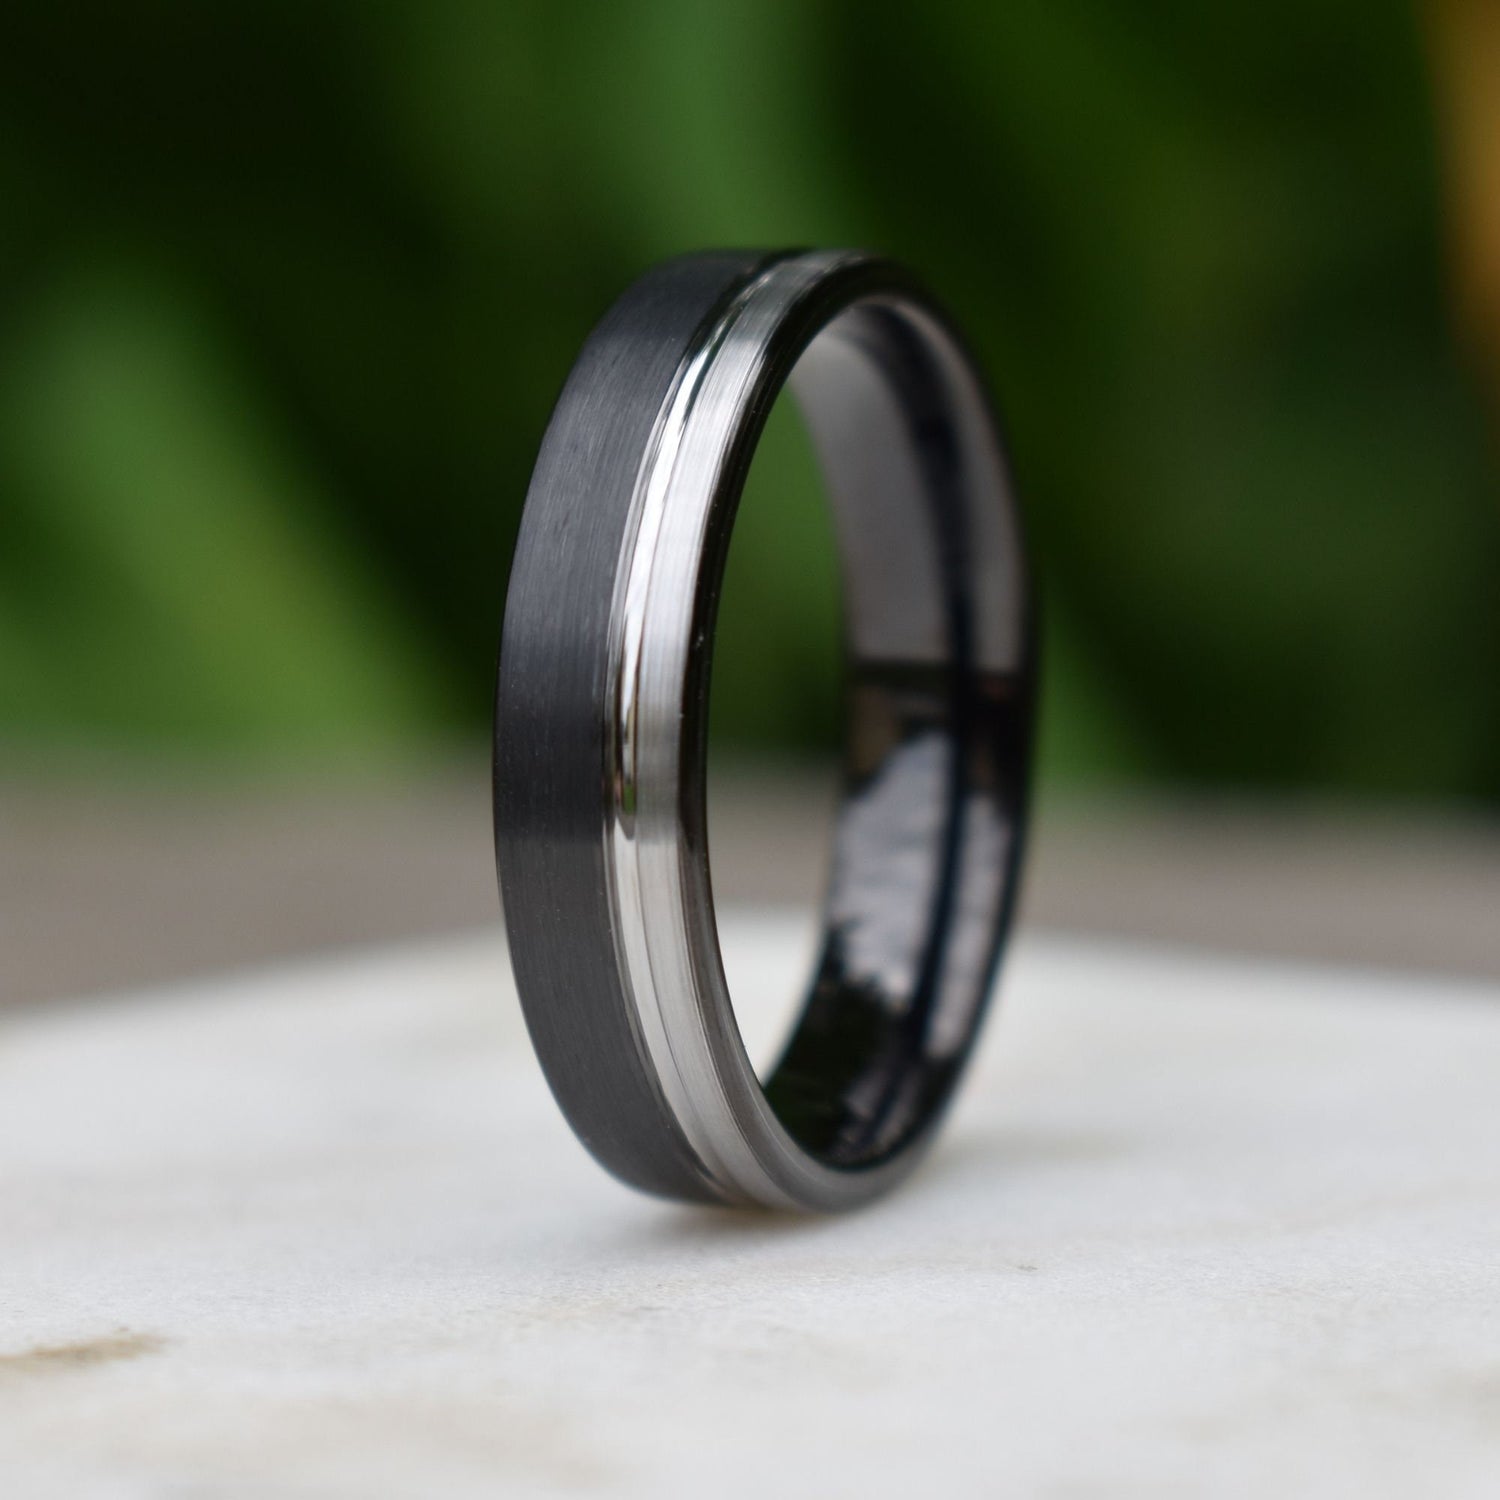 Black Tungsten Ring Sets with Koa Wood Inlay and Sleek Silver Feathered  Arrow | Urban Designer